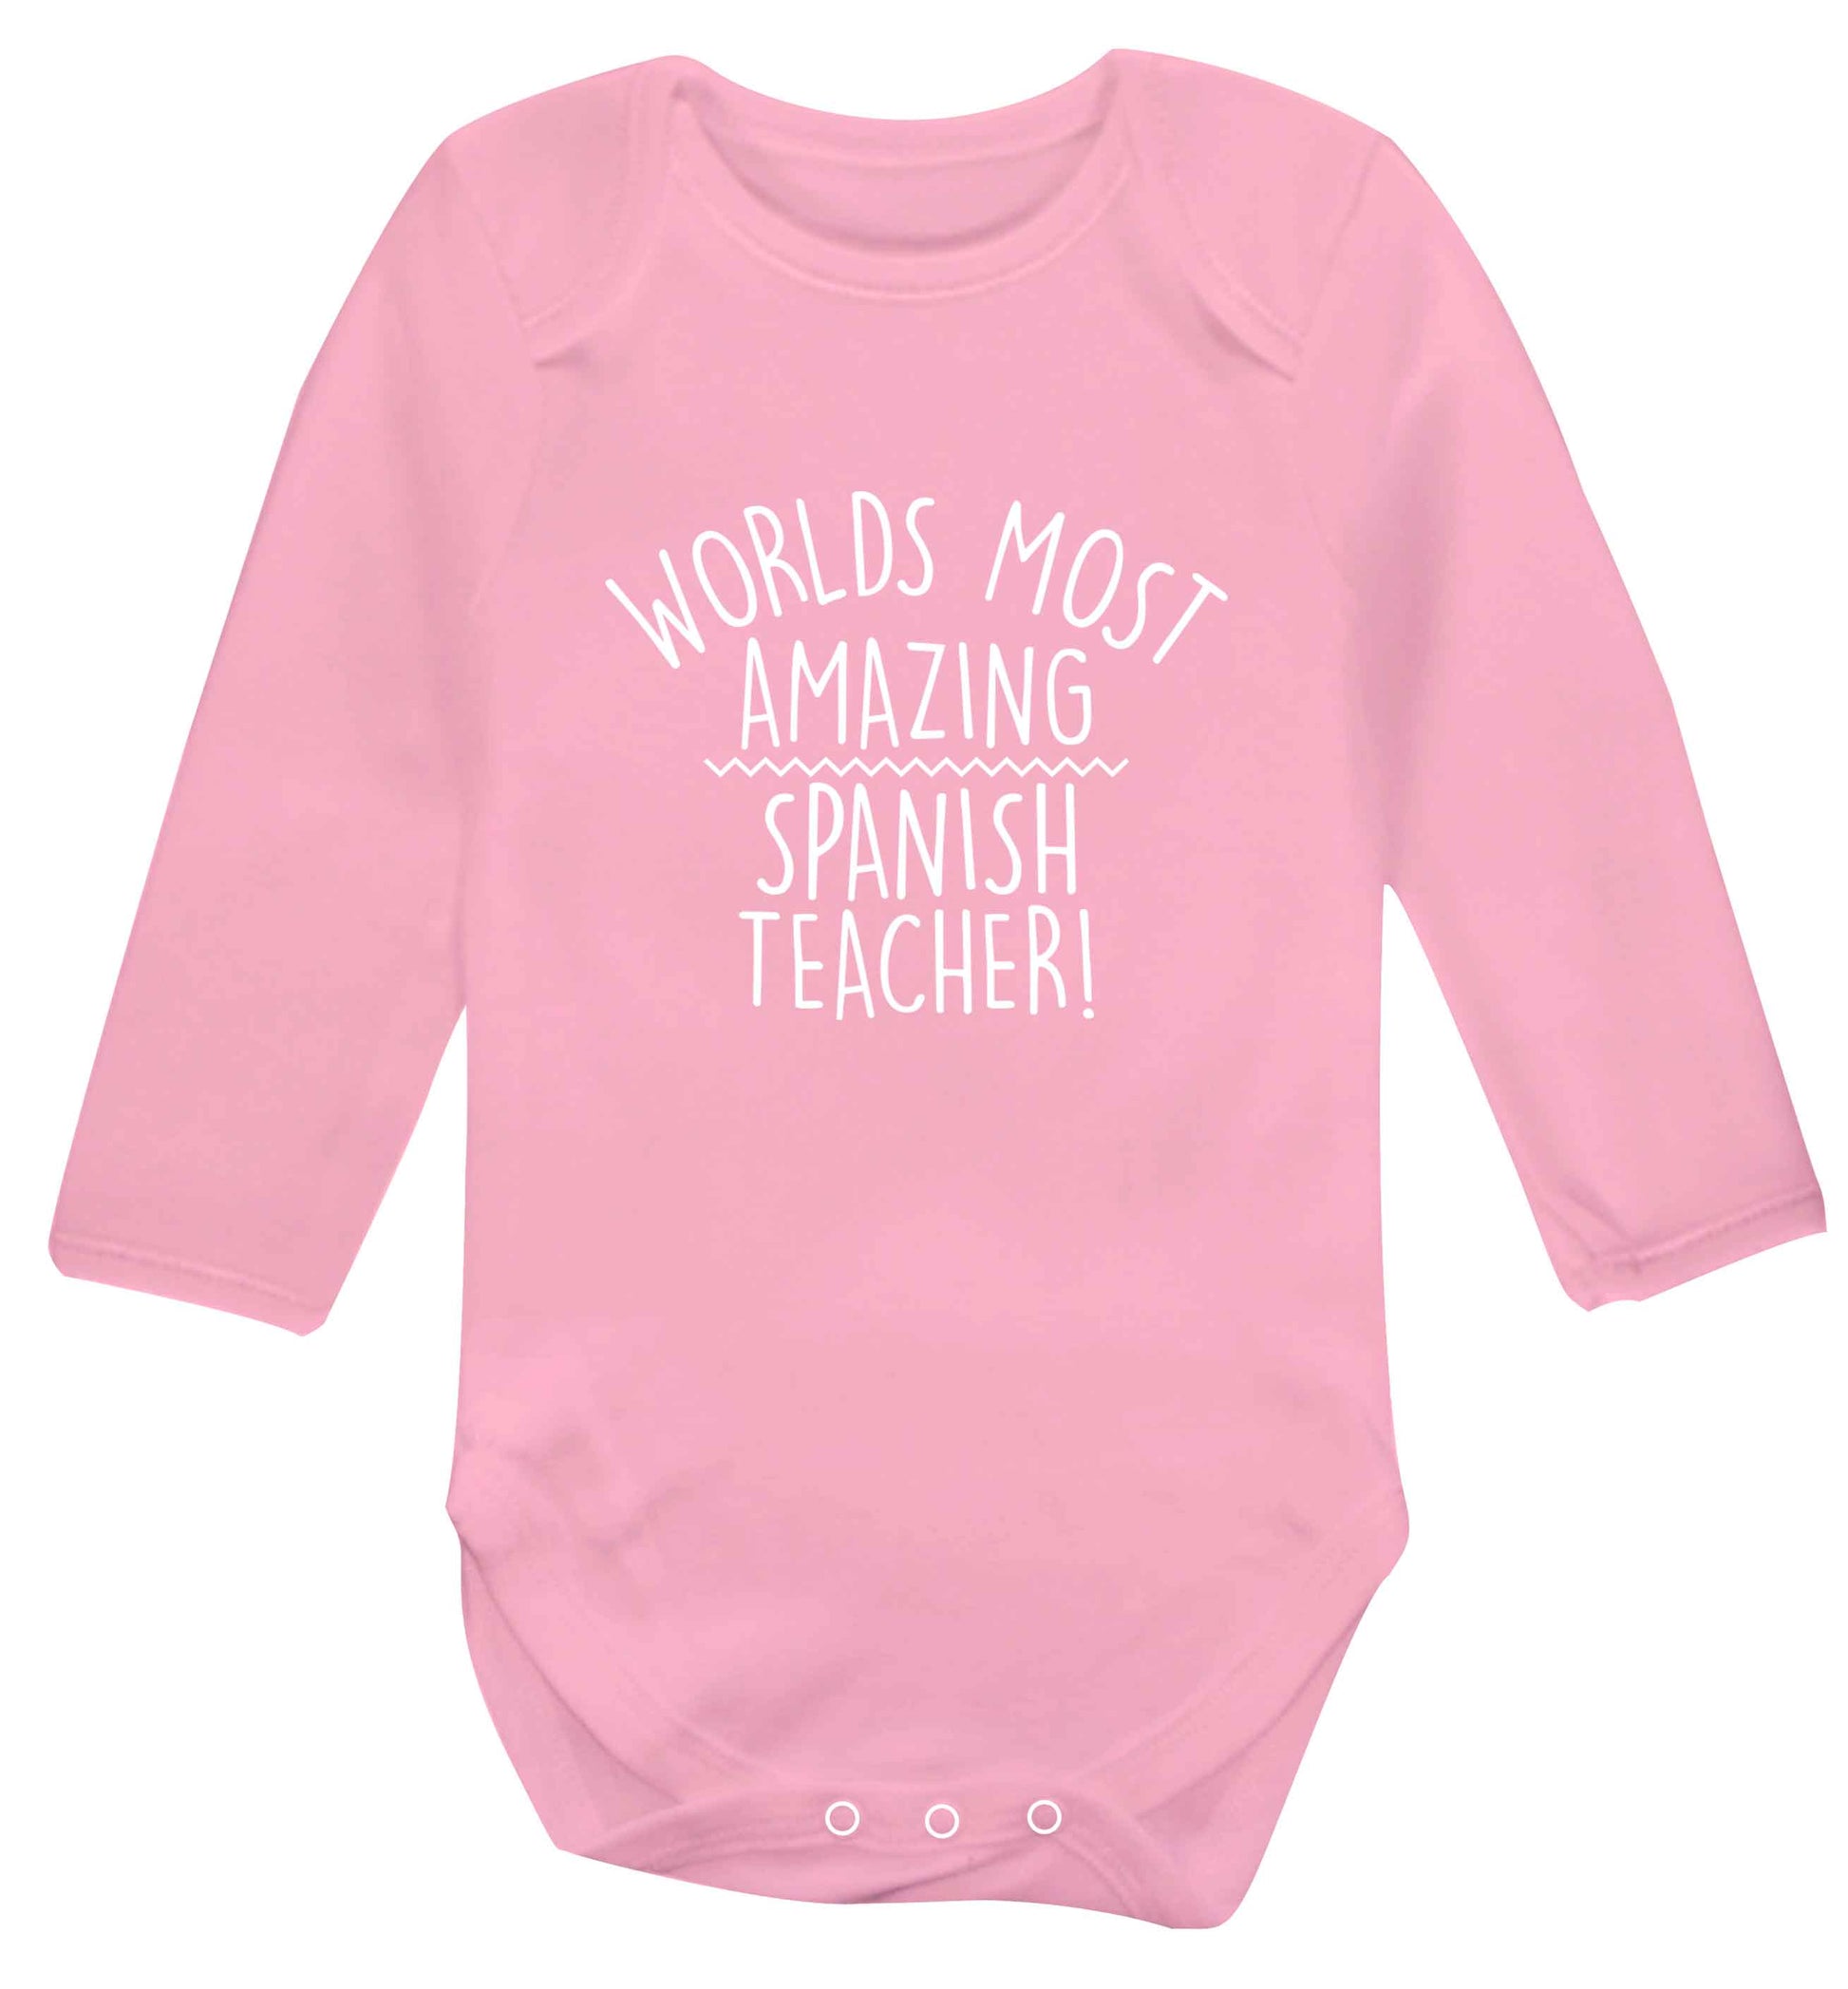 Worlds most amazing Spanish teacher baby vest long sleeved pale pink 6-12 months